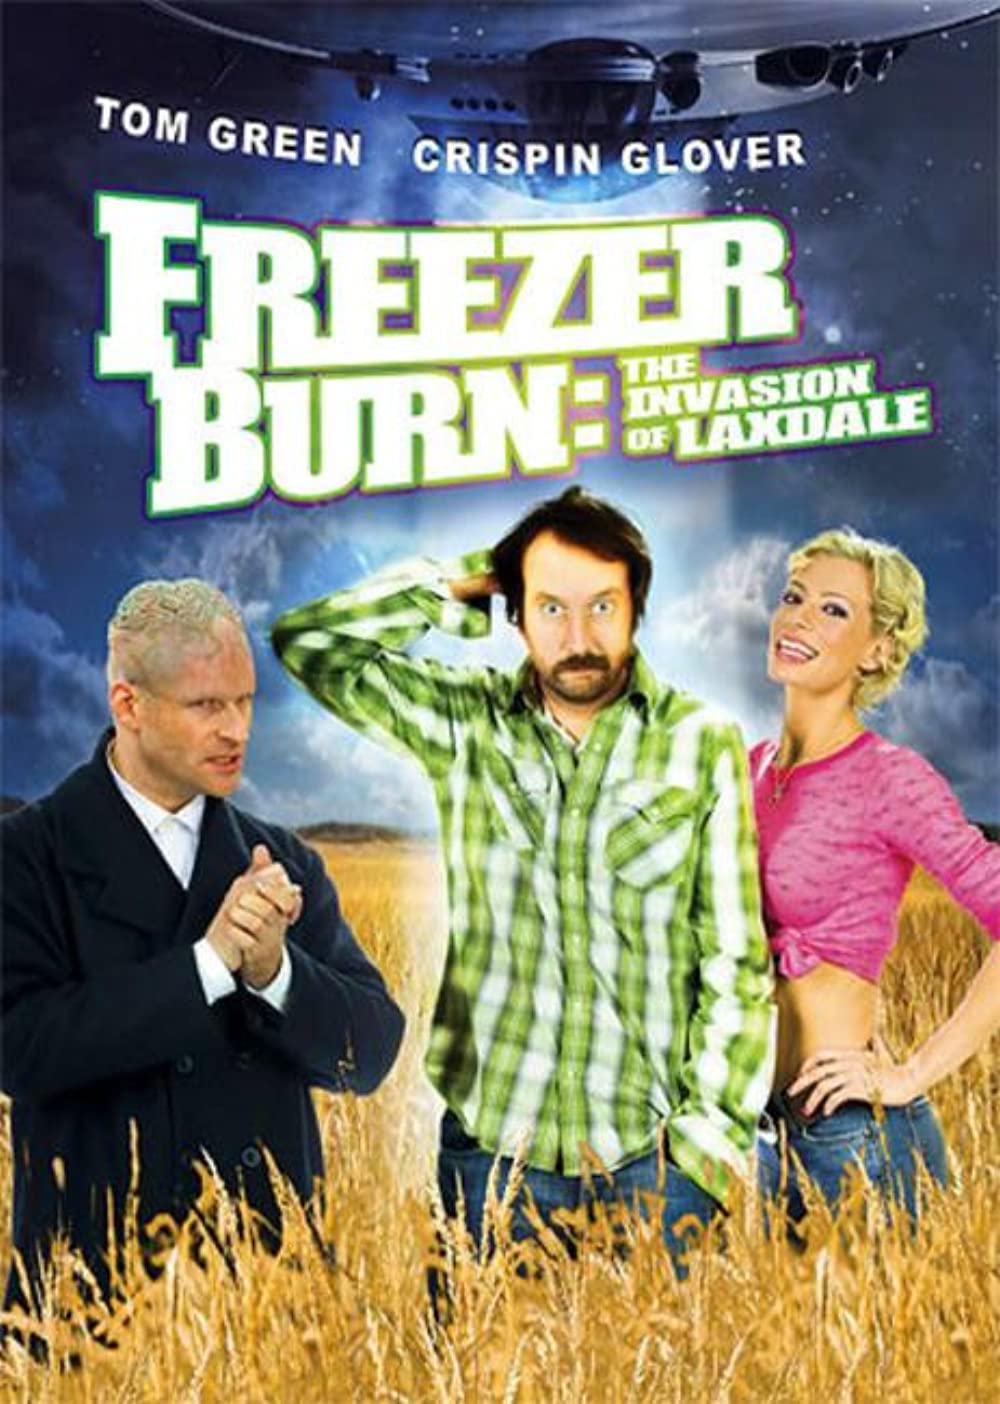 Download Freezer Burn: The Invasion of Laxdale Movie | Freezer Burn: The Invasion Of Laxdale Review